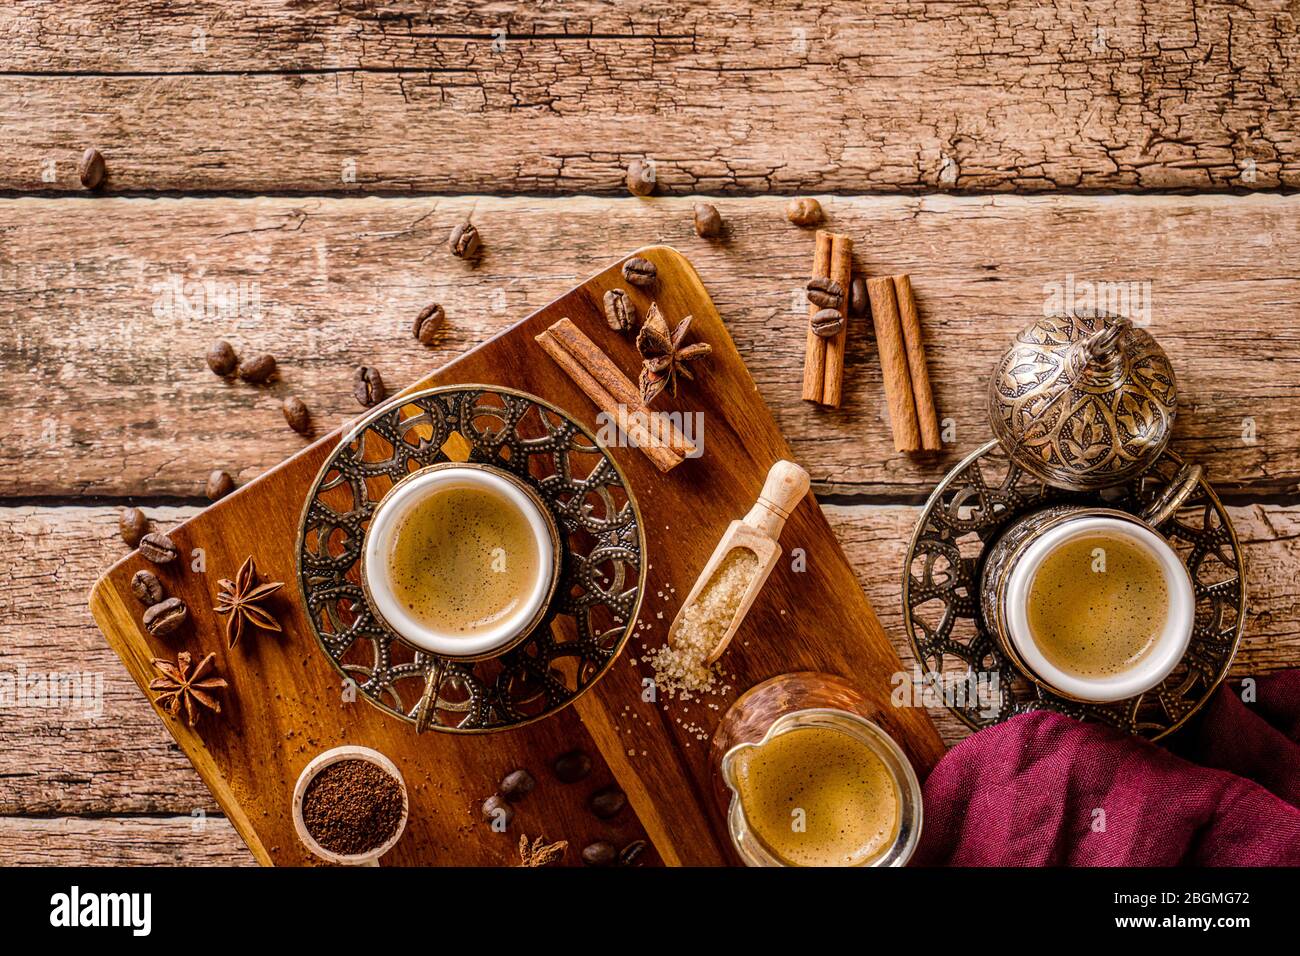 Coffee and spices turkish tradition on a wood background Stock Photo